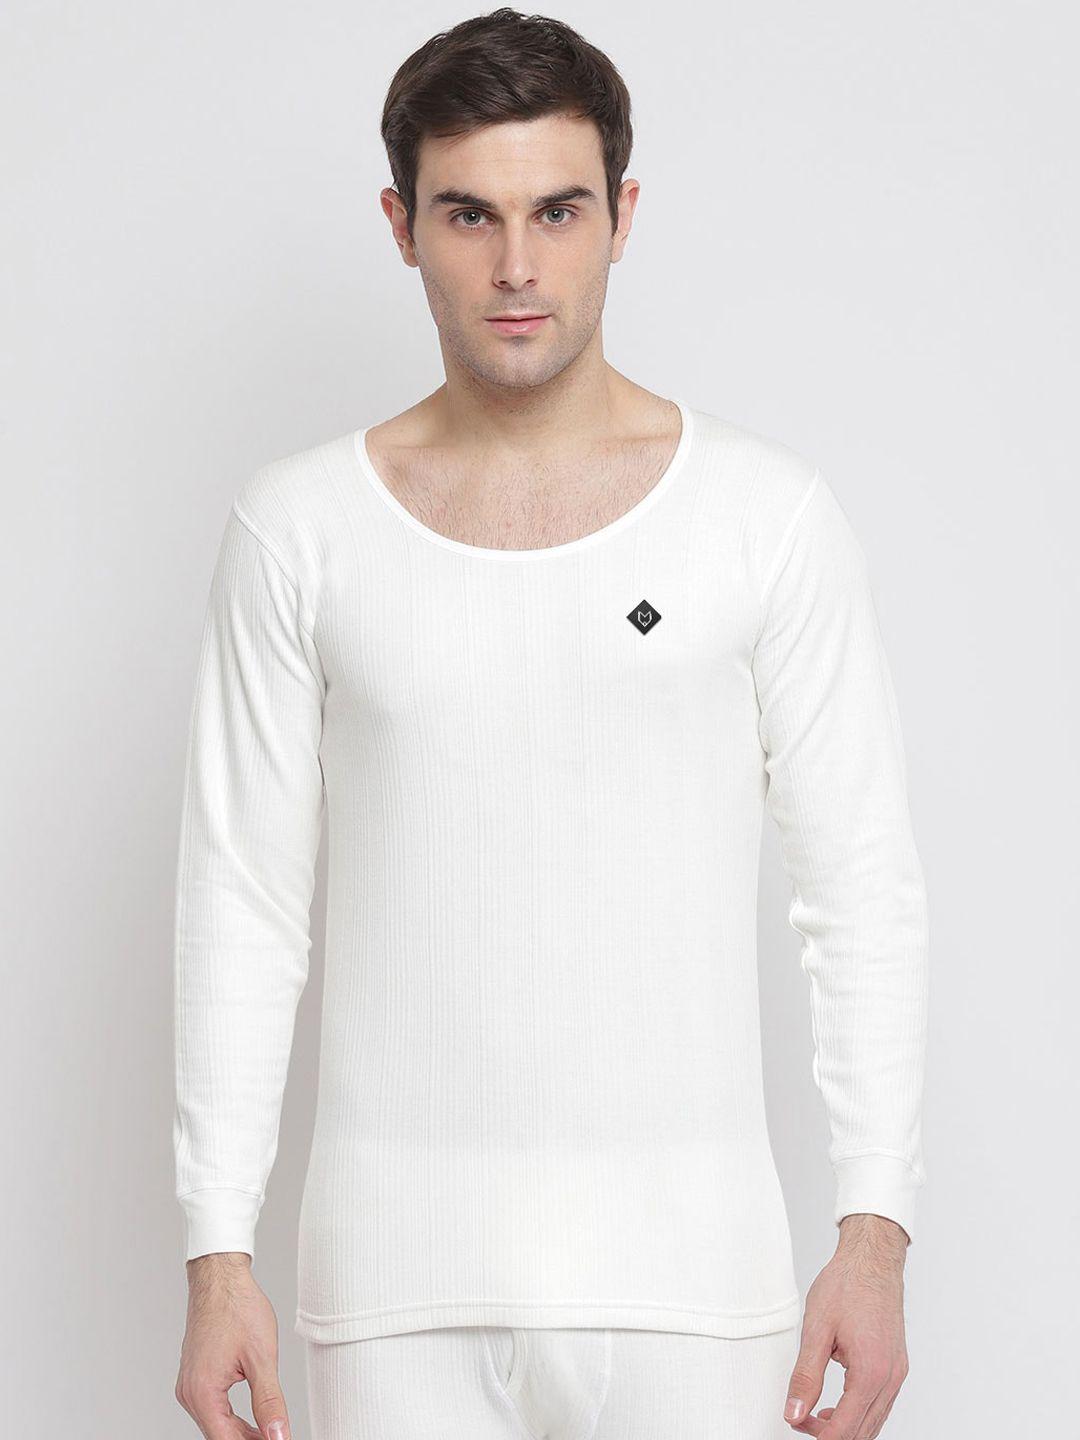 almo-wear-men-off-white-solid-cotton-thermal-tops